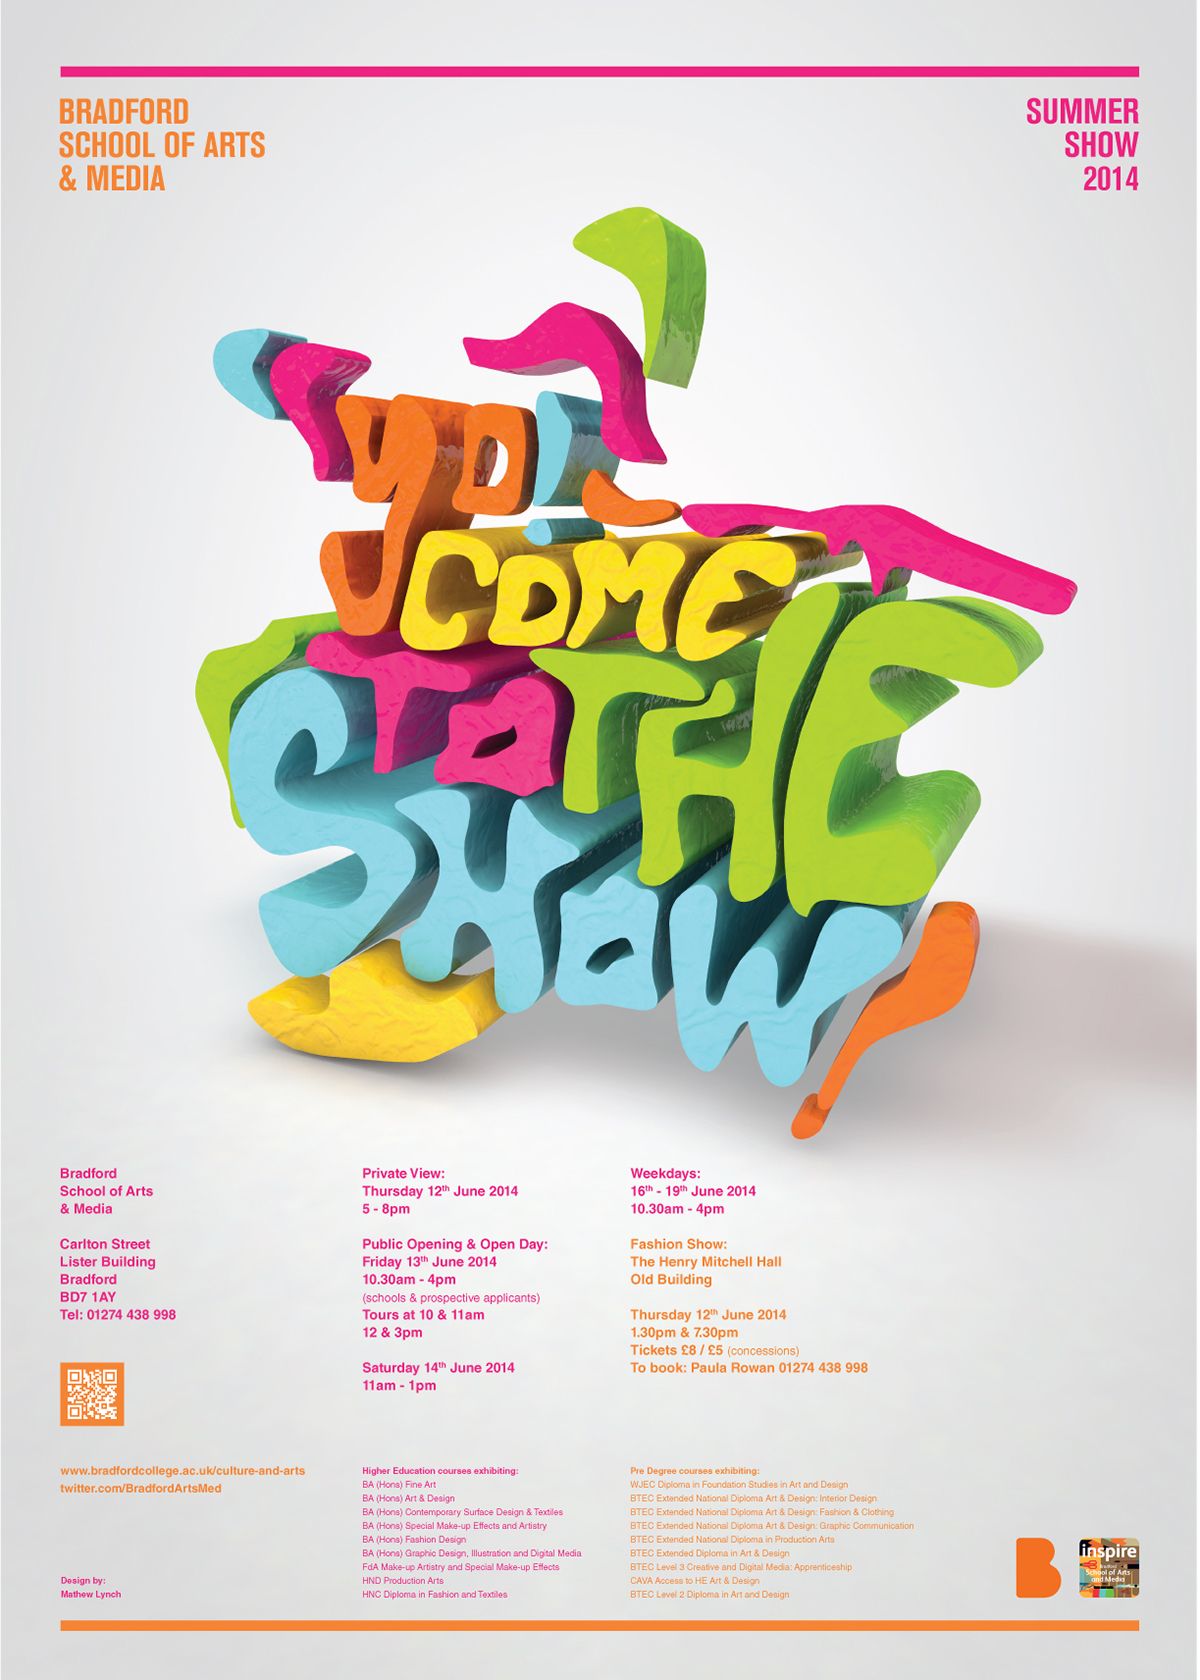 summer show 2014 3D hand drawn typography cinema 4d 3d animation posters flyers promo graphic art brand identity Signage sign making logo graduation show print